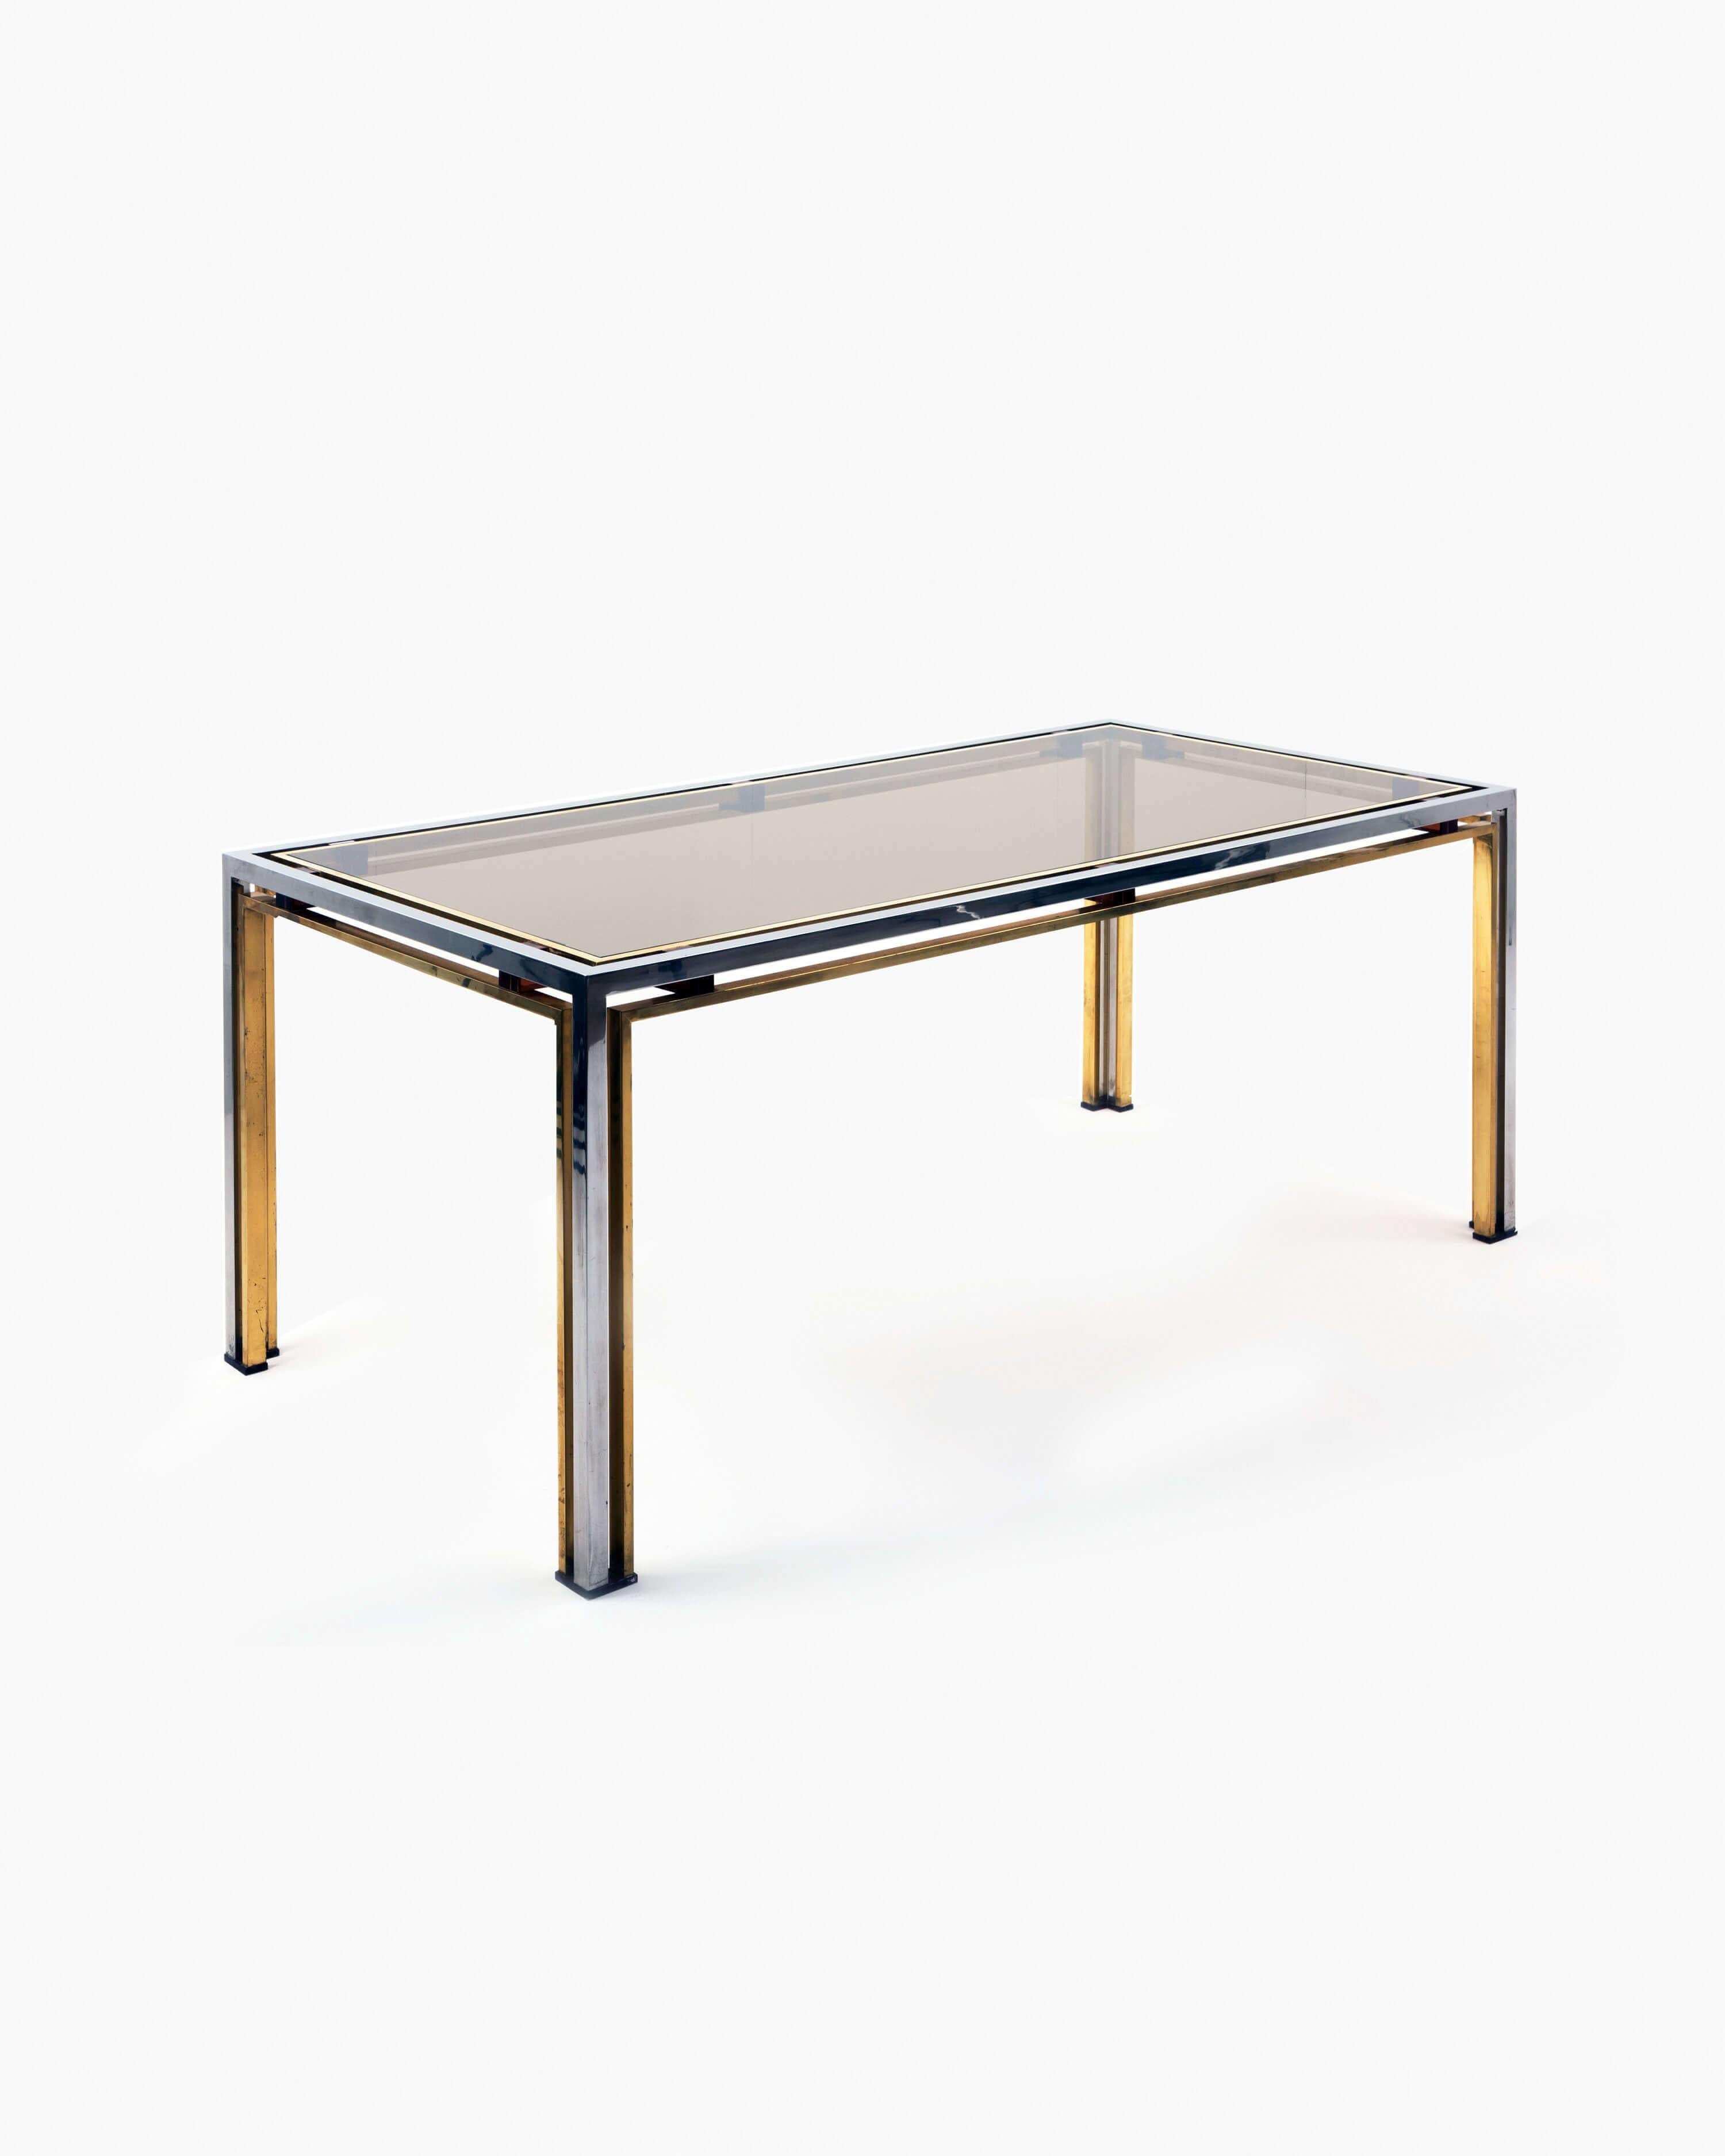 This rectangular dining table by Romeo Rega stands on four gilt and chromed brass legs, with a smoked glass top. Rega produced many entertainment-focussed pieces that have been favored by lovers of the Hollywood Regency. The reduced elegance of this